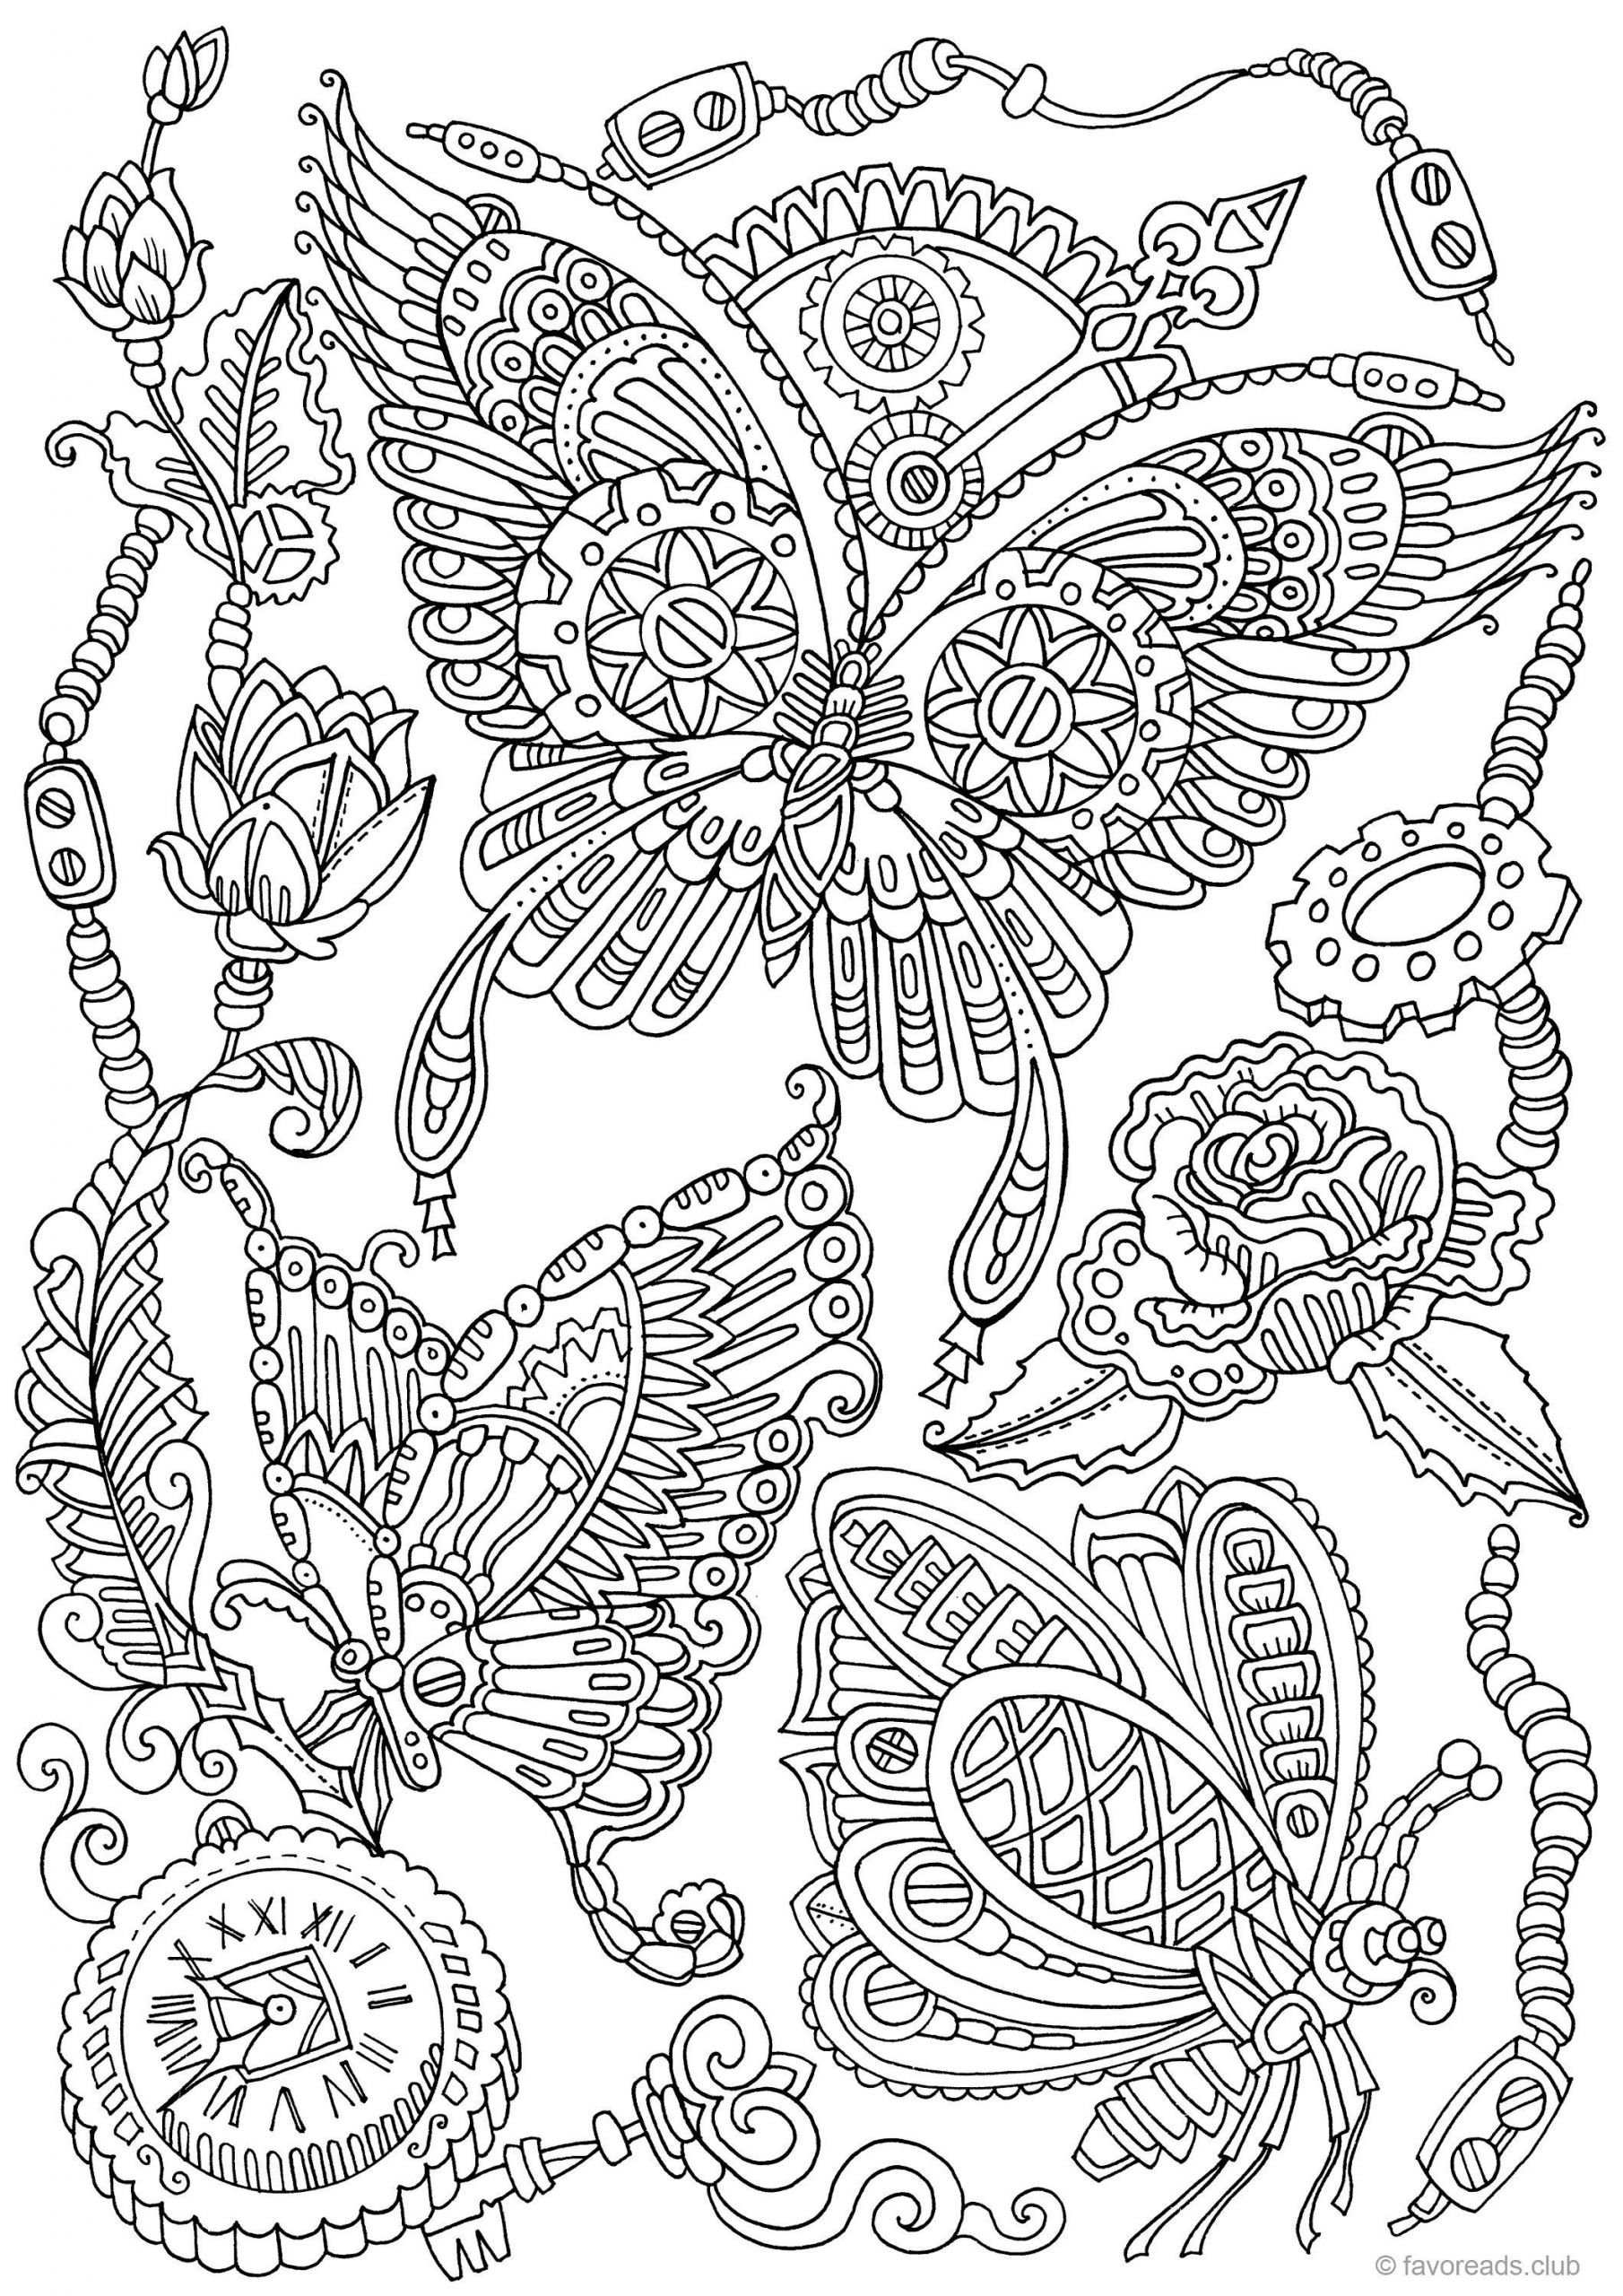 Printable Adult Coloring Book
 Steampunk Butterflies Printable Adult Coloring Page from